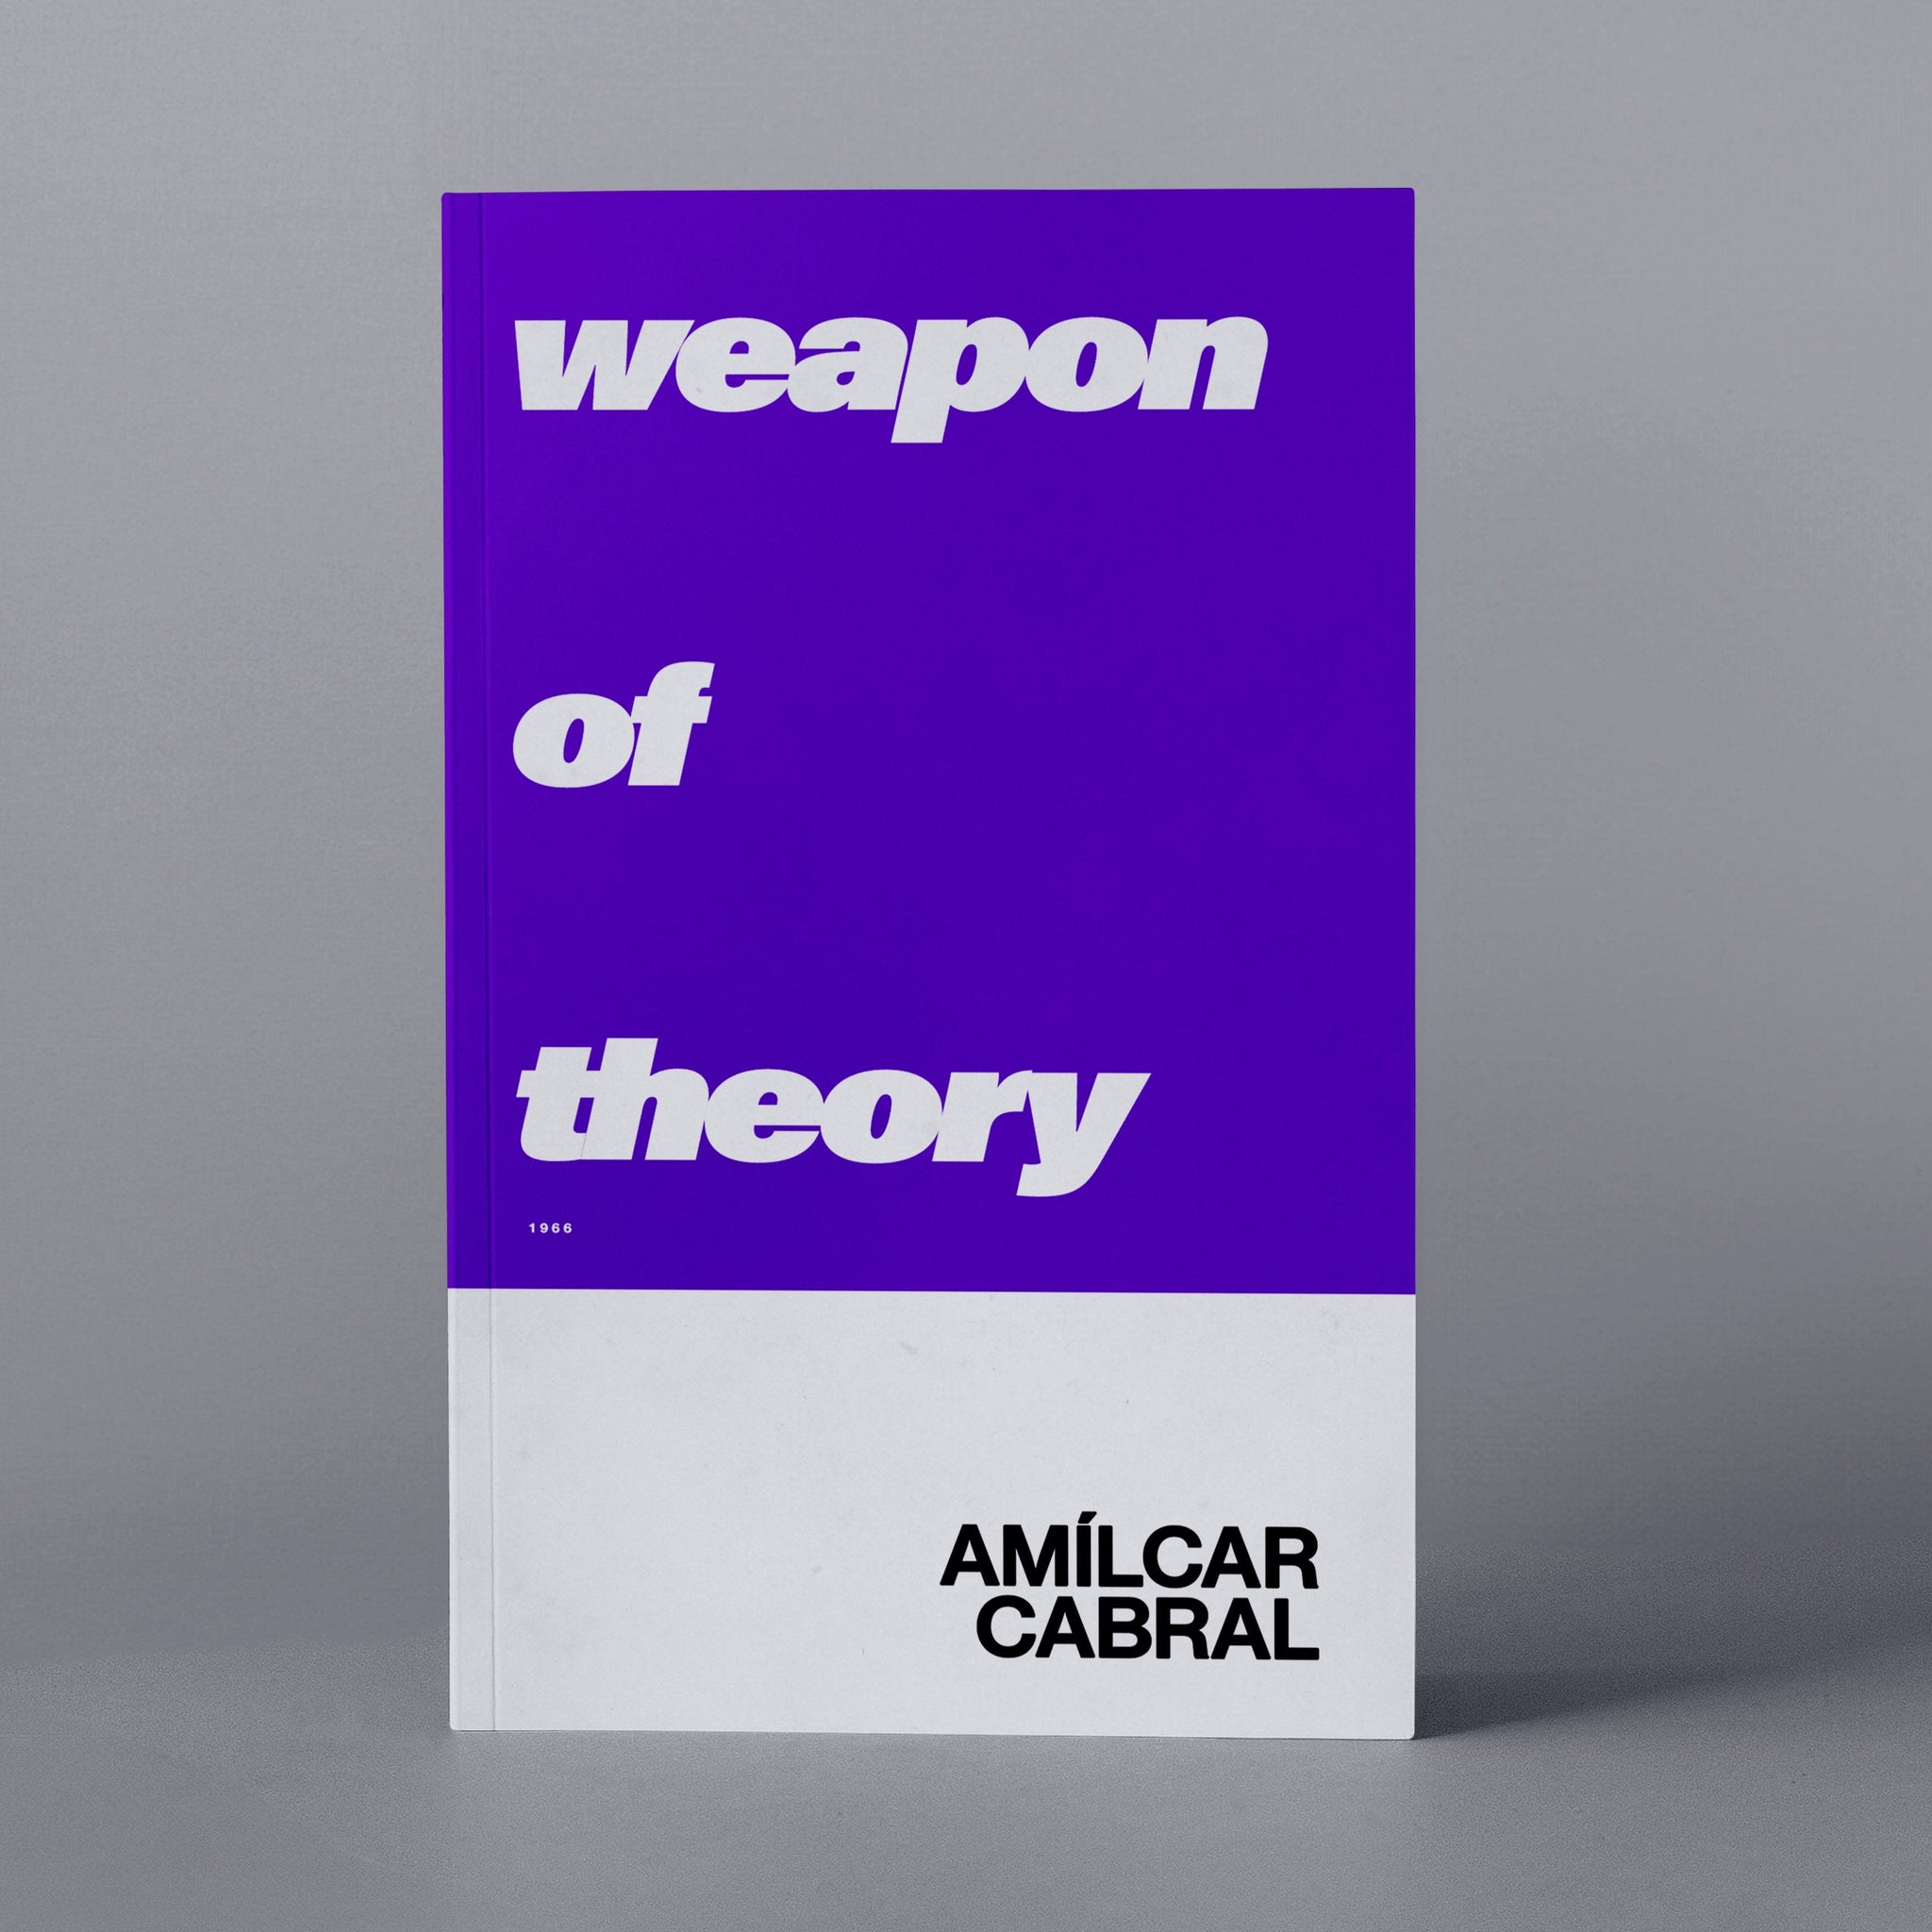 1966: Weapon of Theory (Amilcar Cabral)